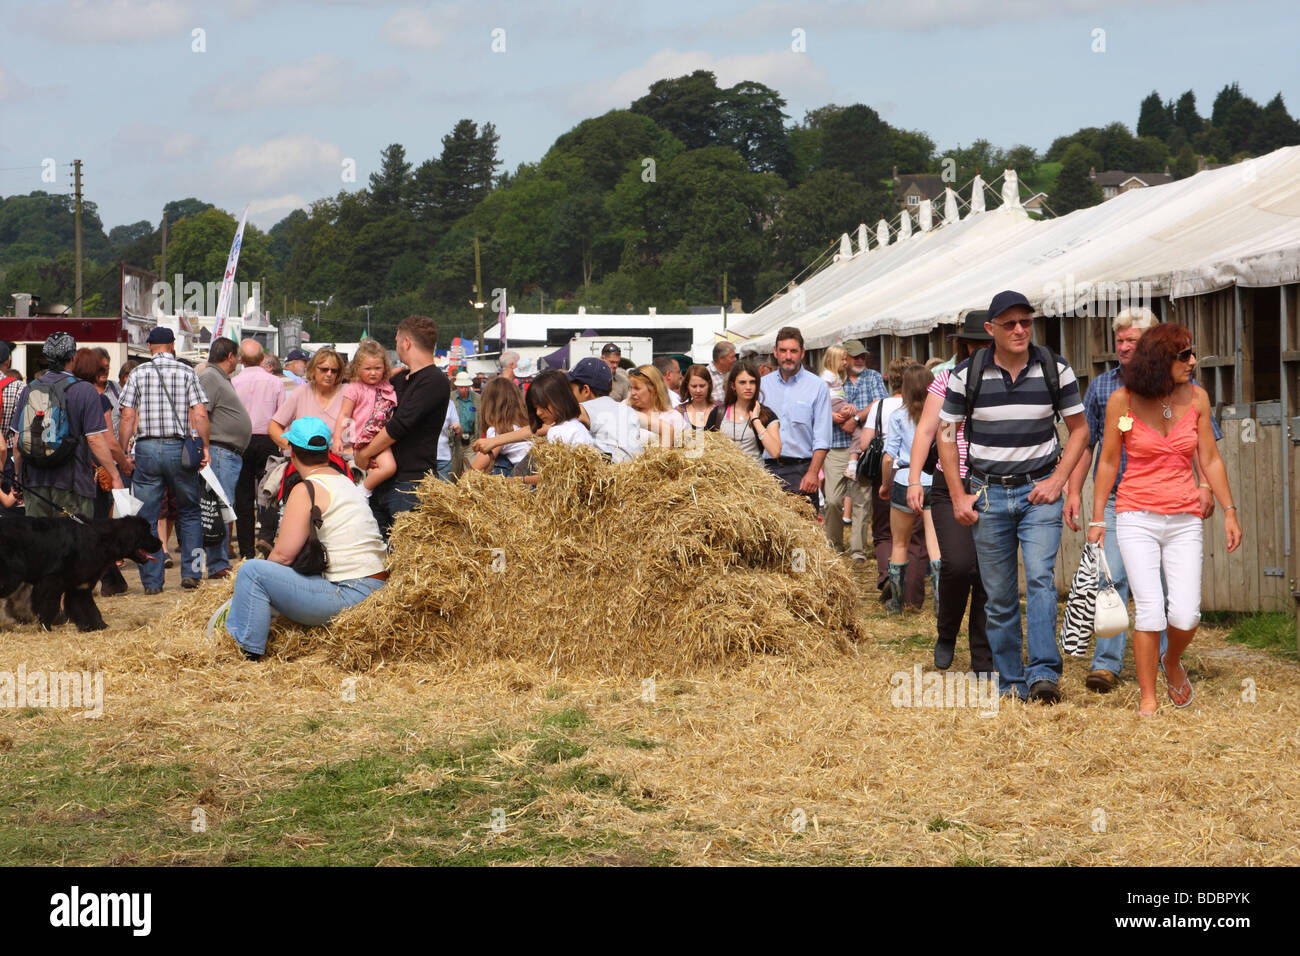 Visitors at the Bakewell Show, Bakewell, Derbyshire, England, U.K. Stock Photo